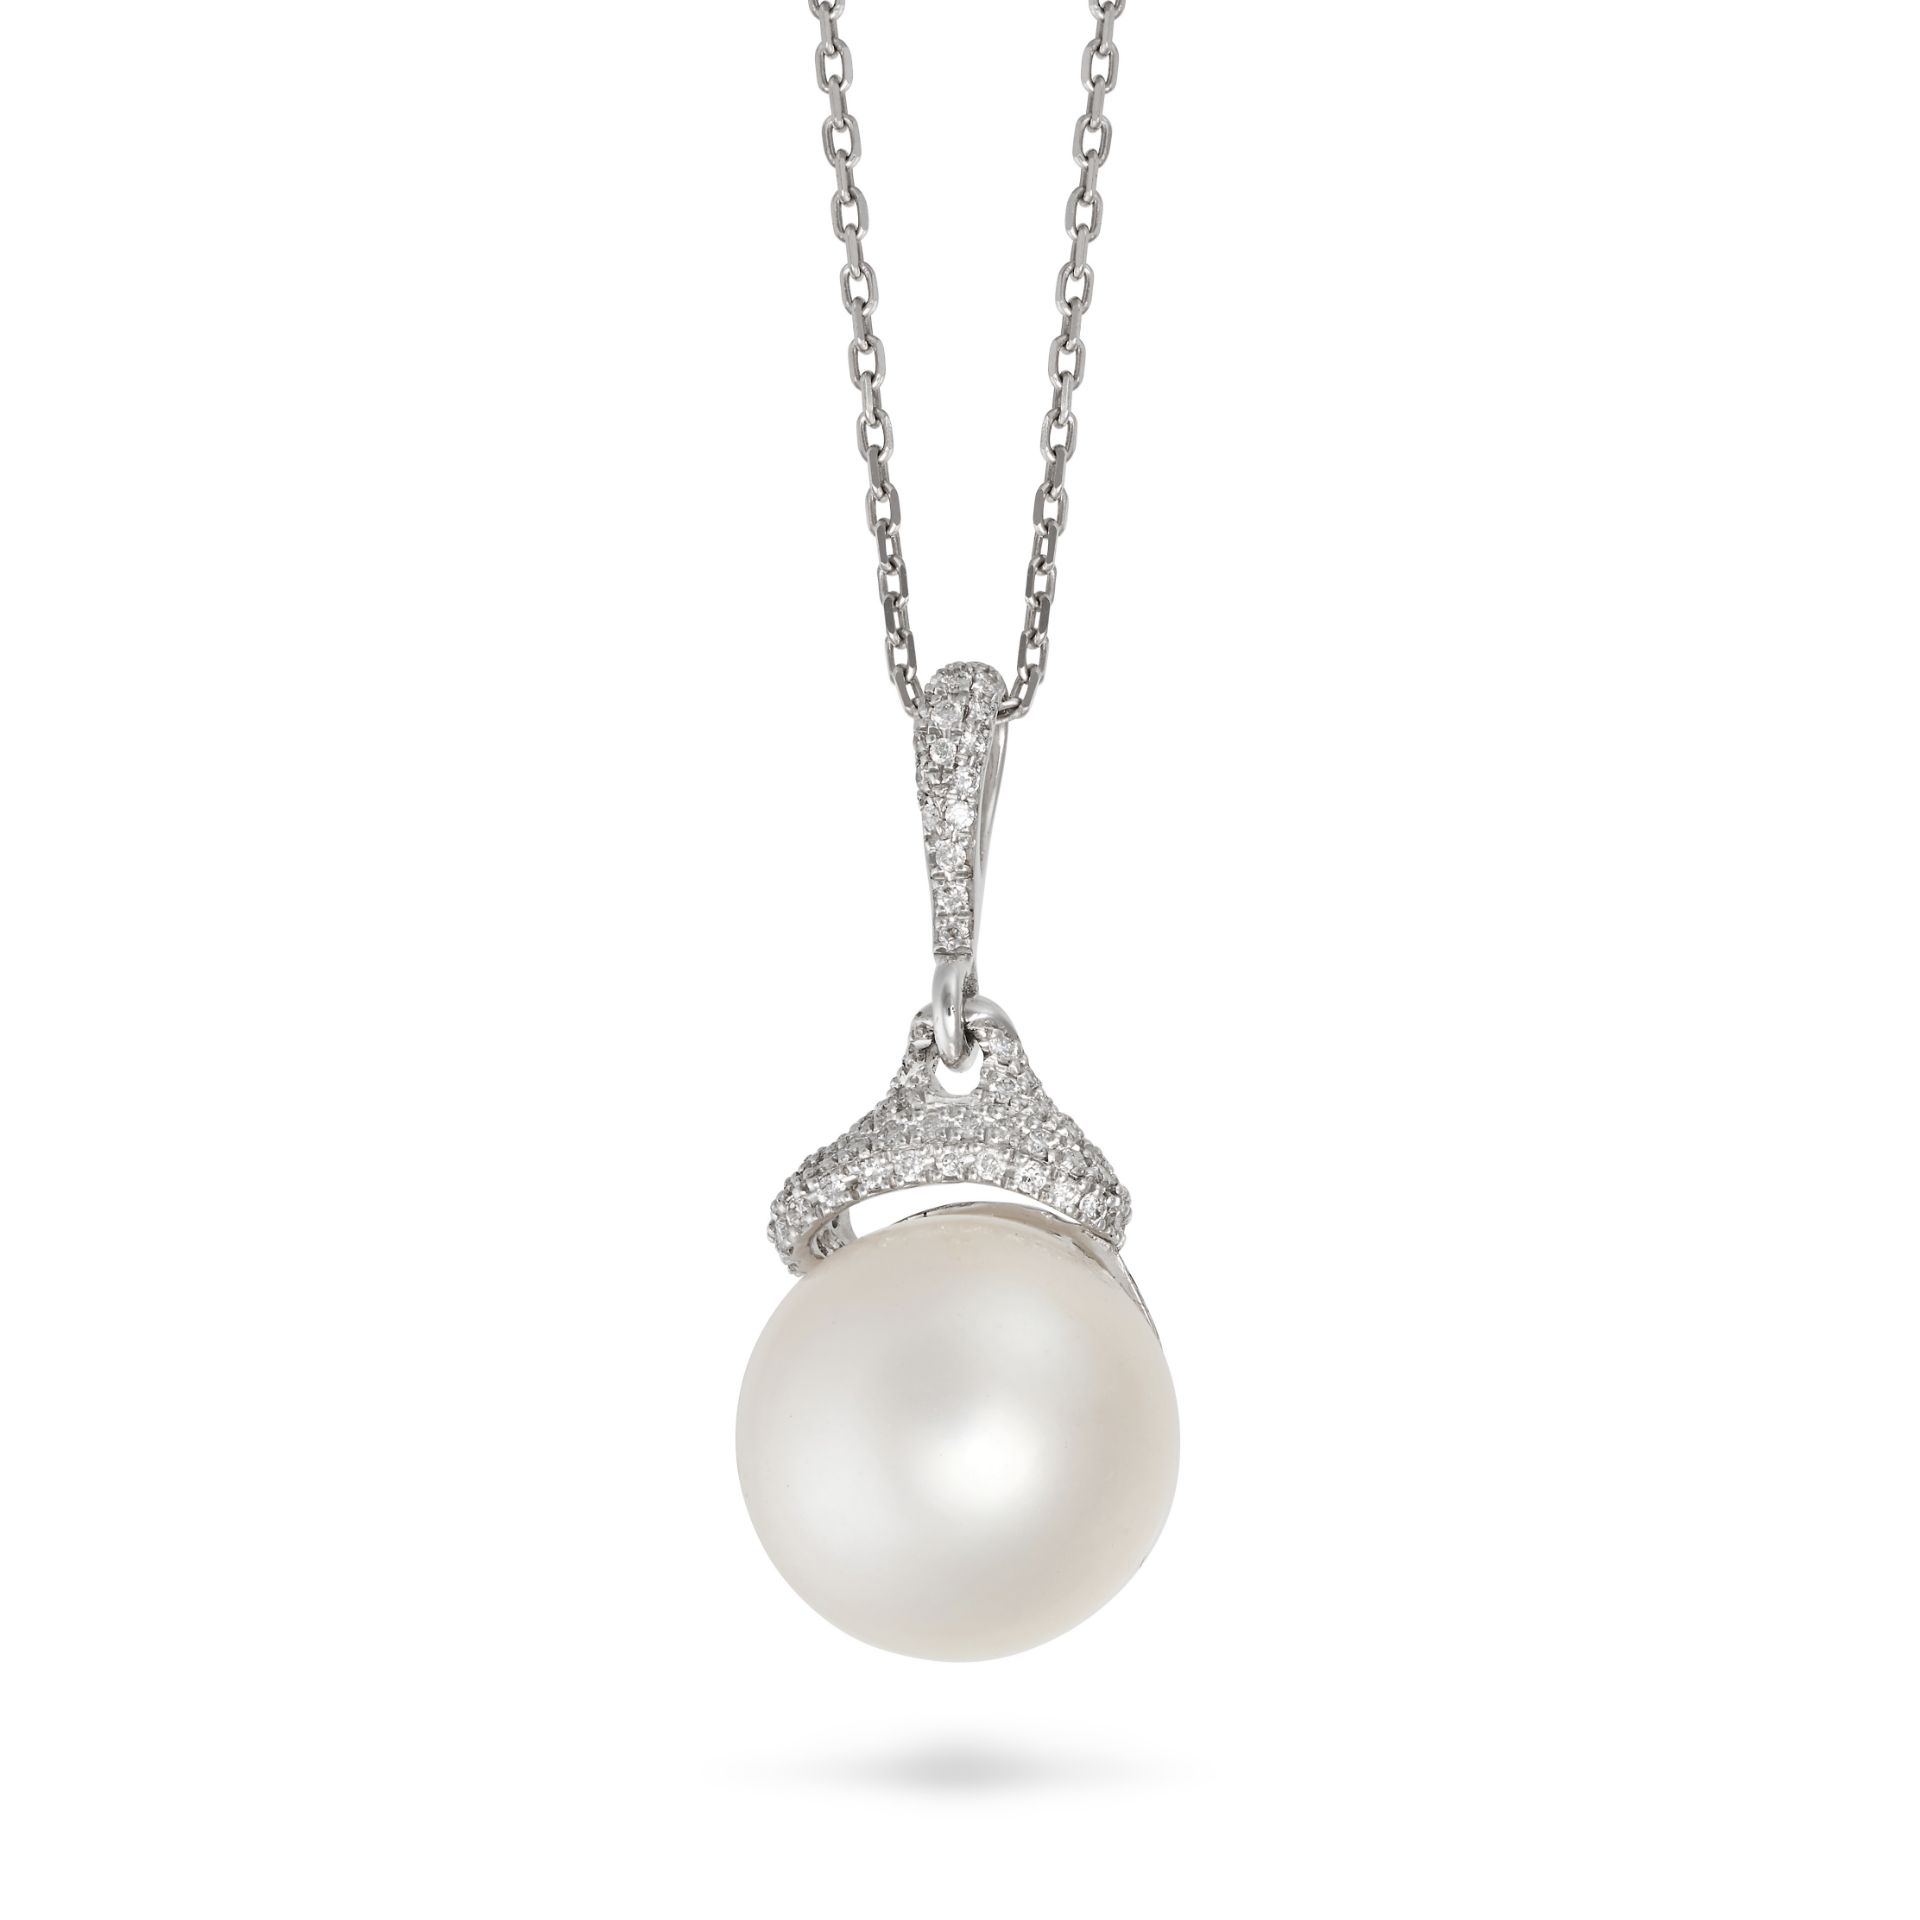 NO RESERVE - A PEARL AND DIAMOND PENDANT NECKLACE in 18ct white gold, the pendant set with a pear...